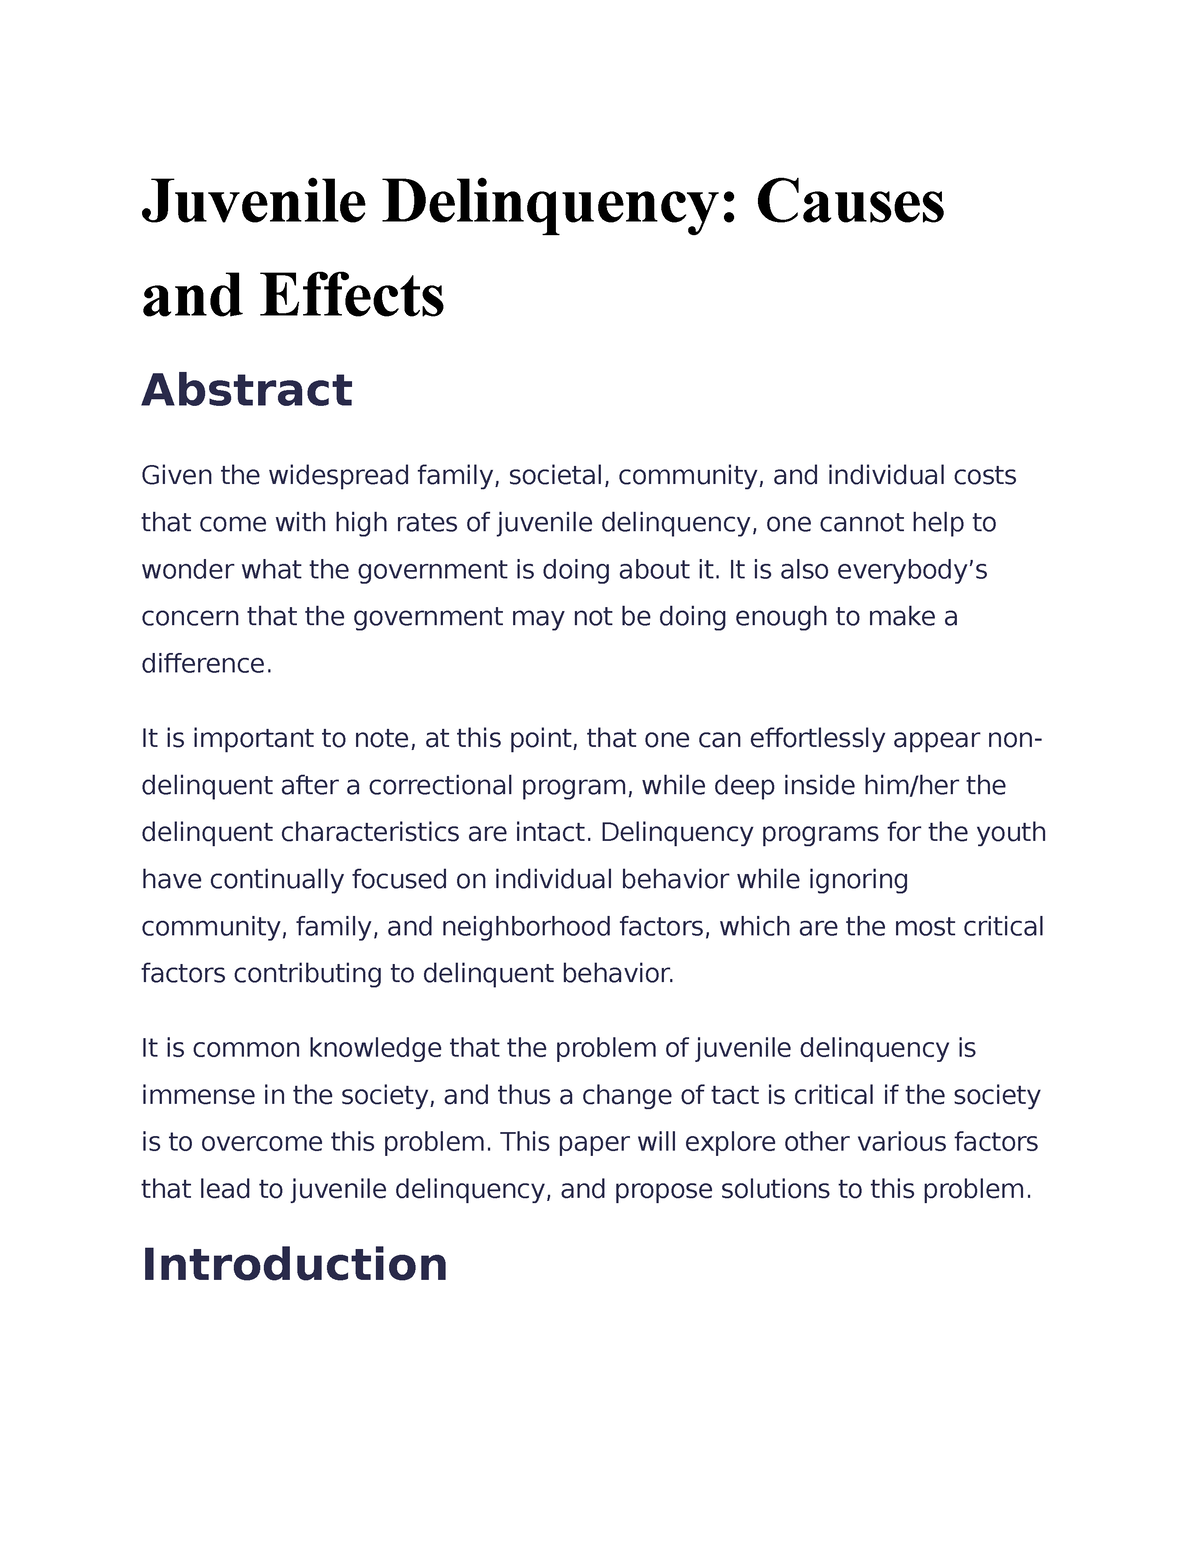 causes of juvenile delinquency research paper